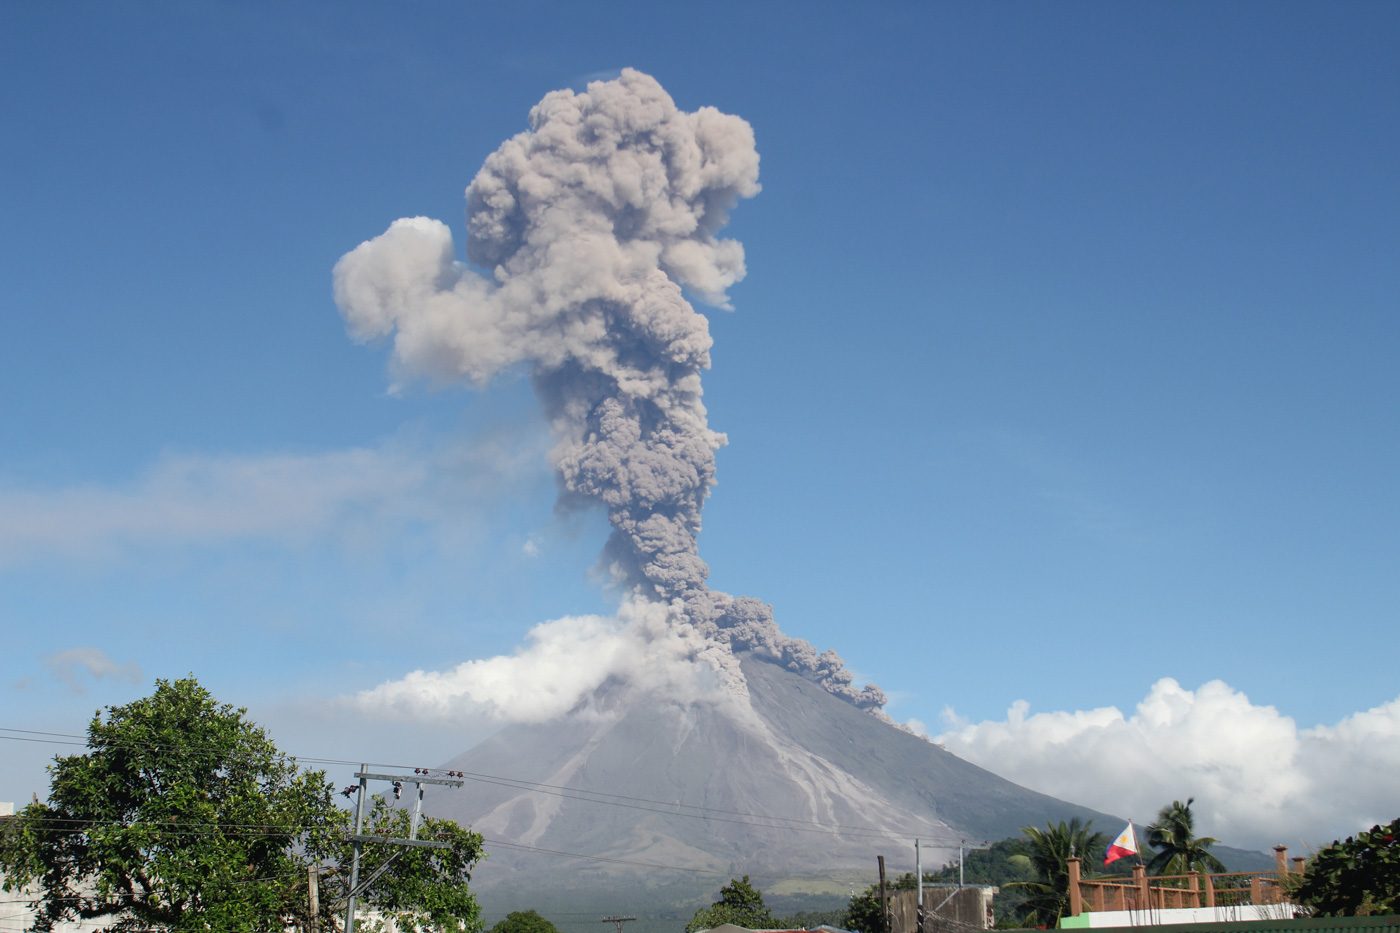 Mayon volcano and its remains in memory